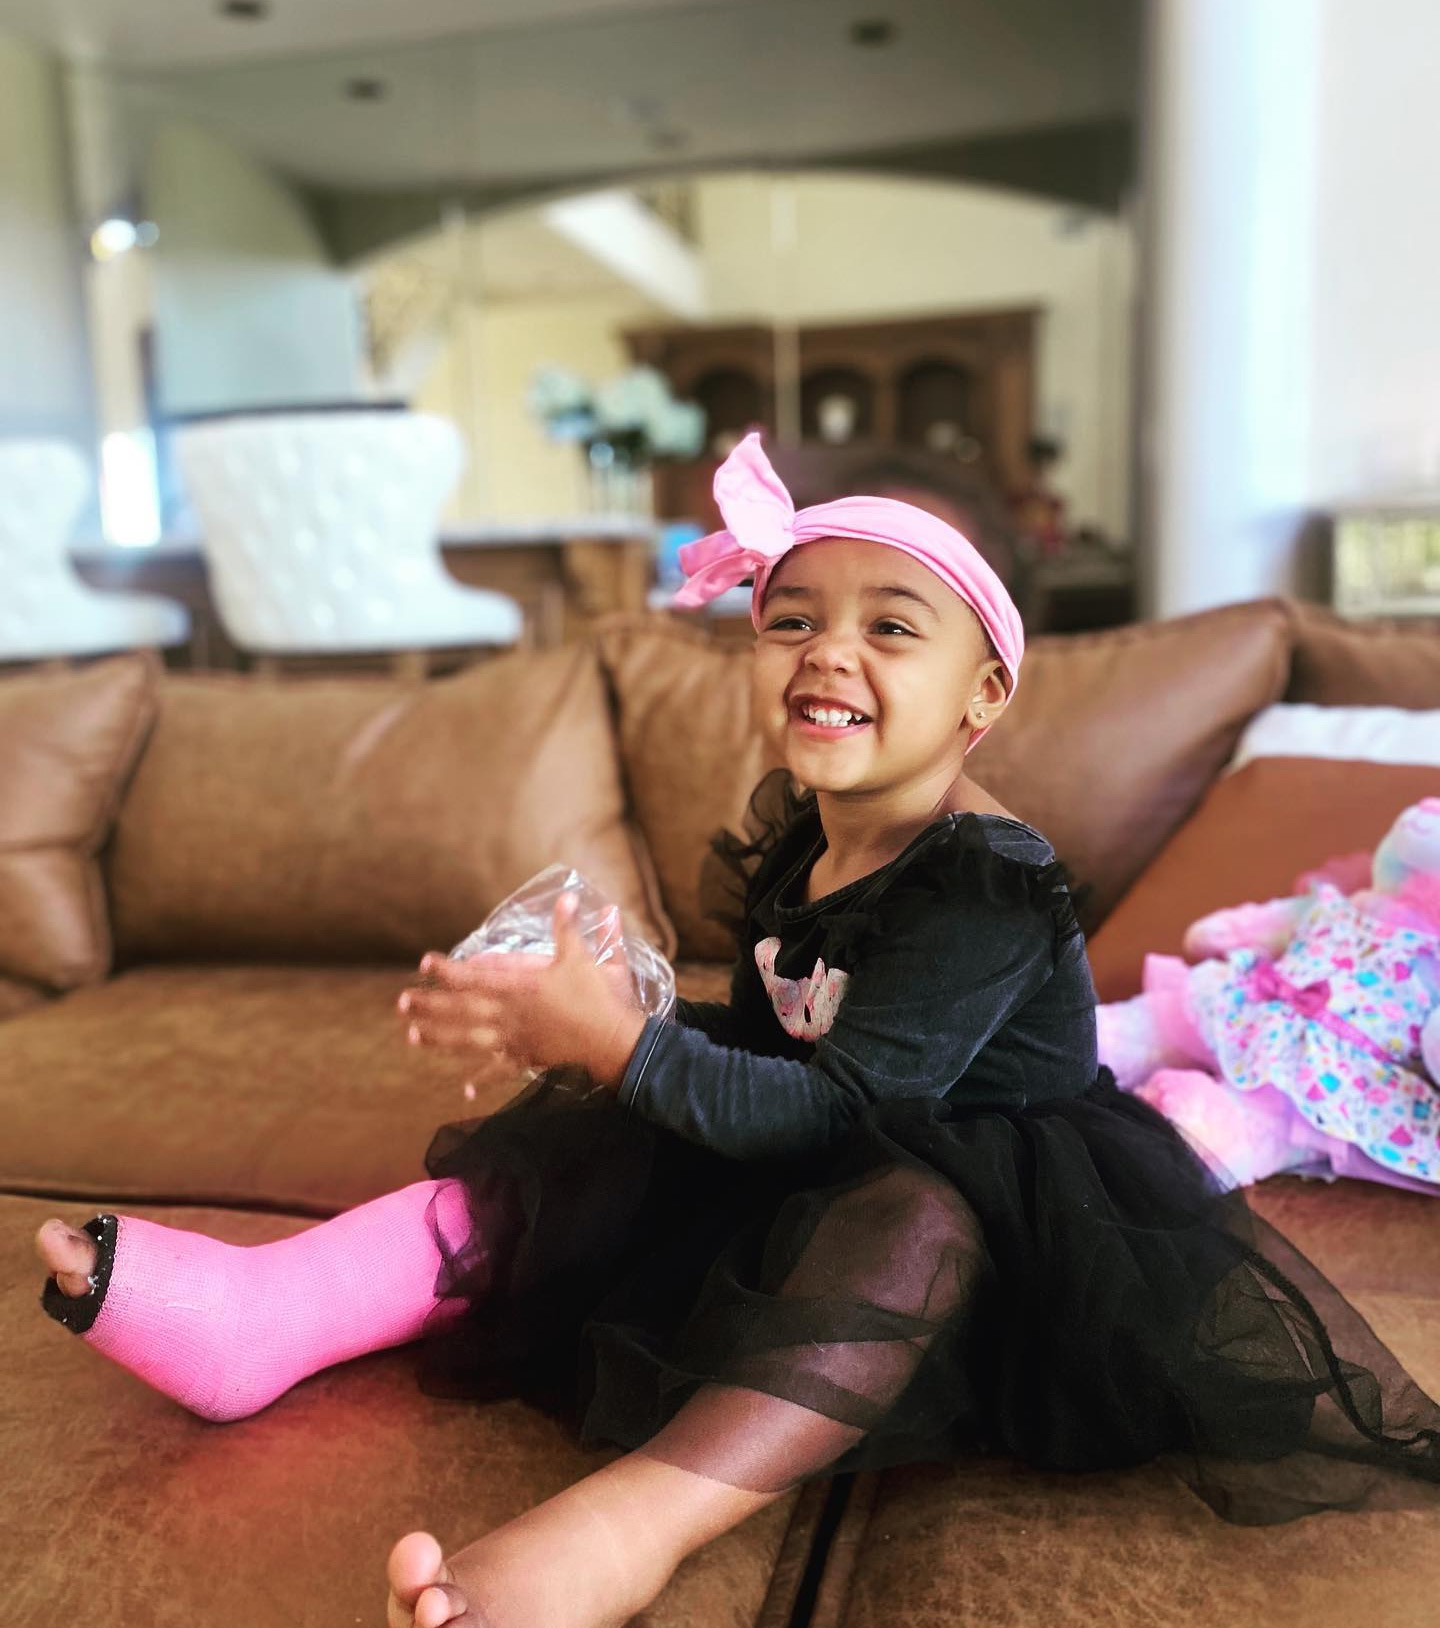 Nick Cannon Bonds With Daughter Halo In Matching Pink Outfits